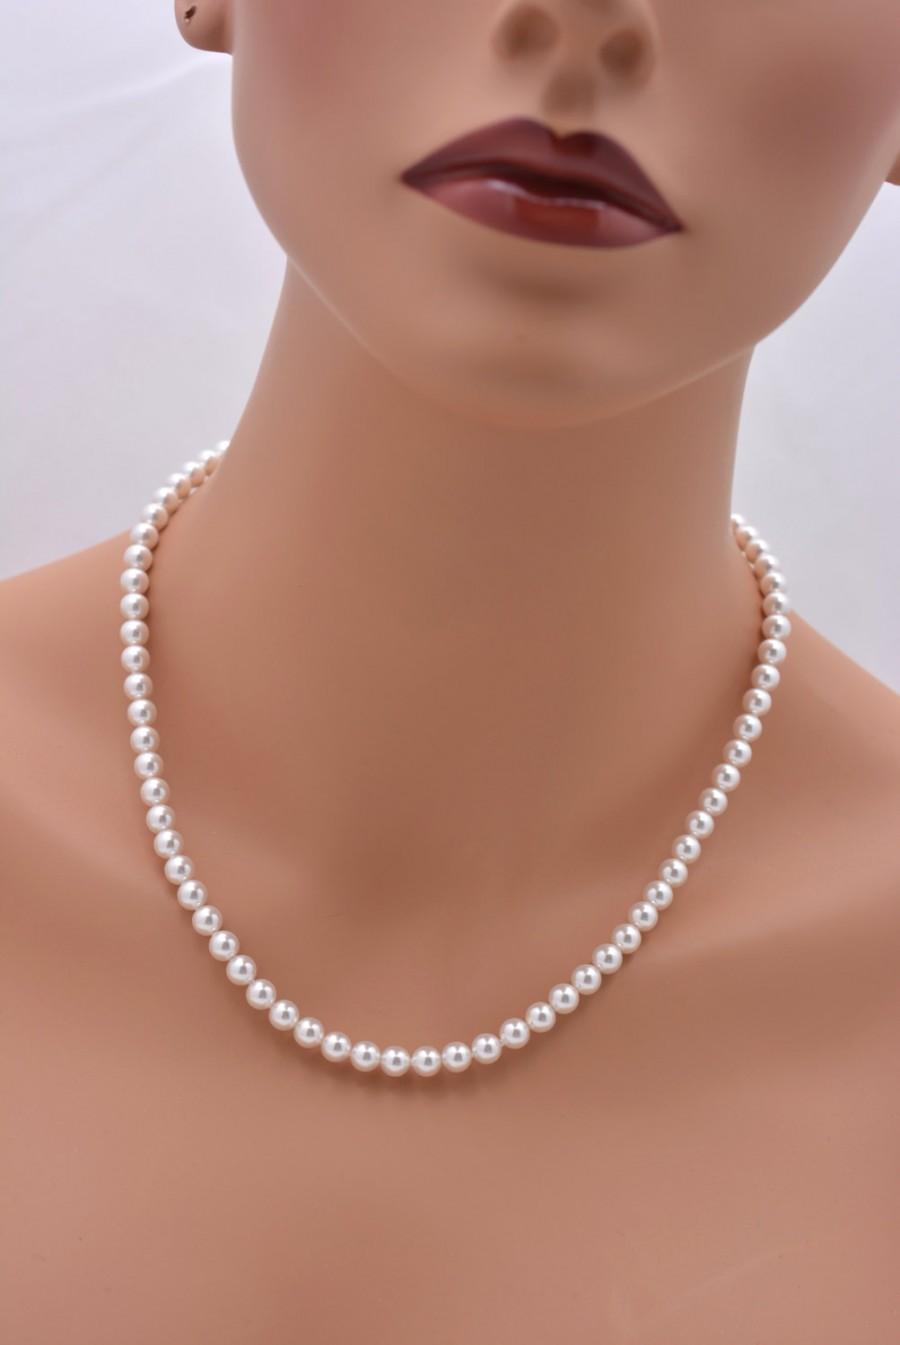 Wedding - Pearl Necklace, Pearl Bridesmaid Necklace, Classic Pearl Necklace, Pearl Strand Necklace, White or Ivory Pearl Necklace, 6mm Pearl 0259